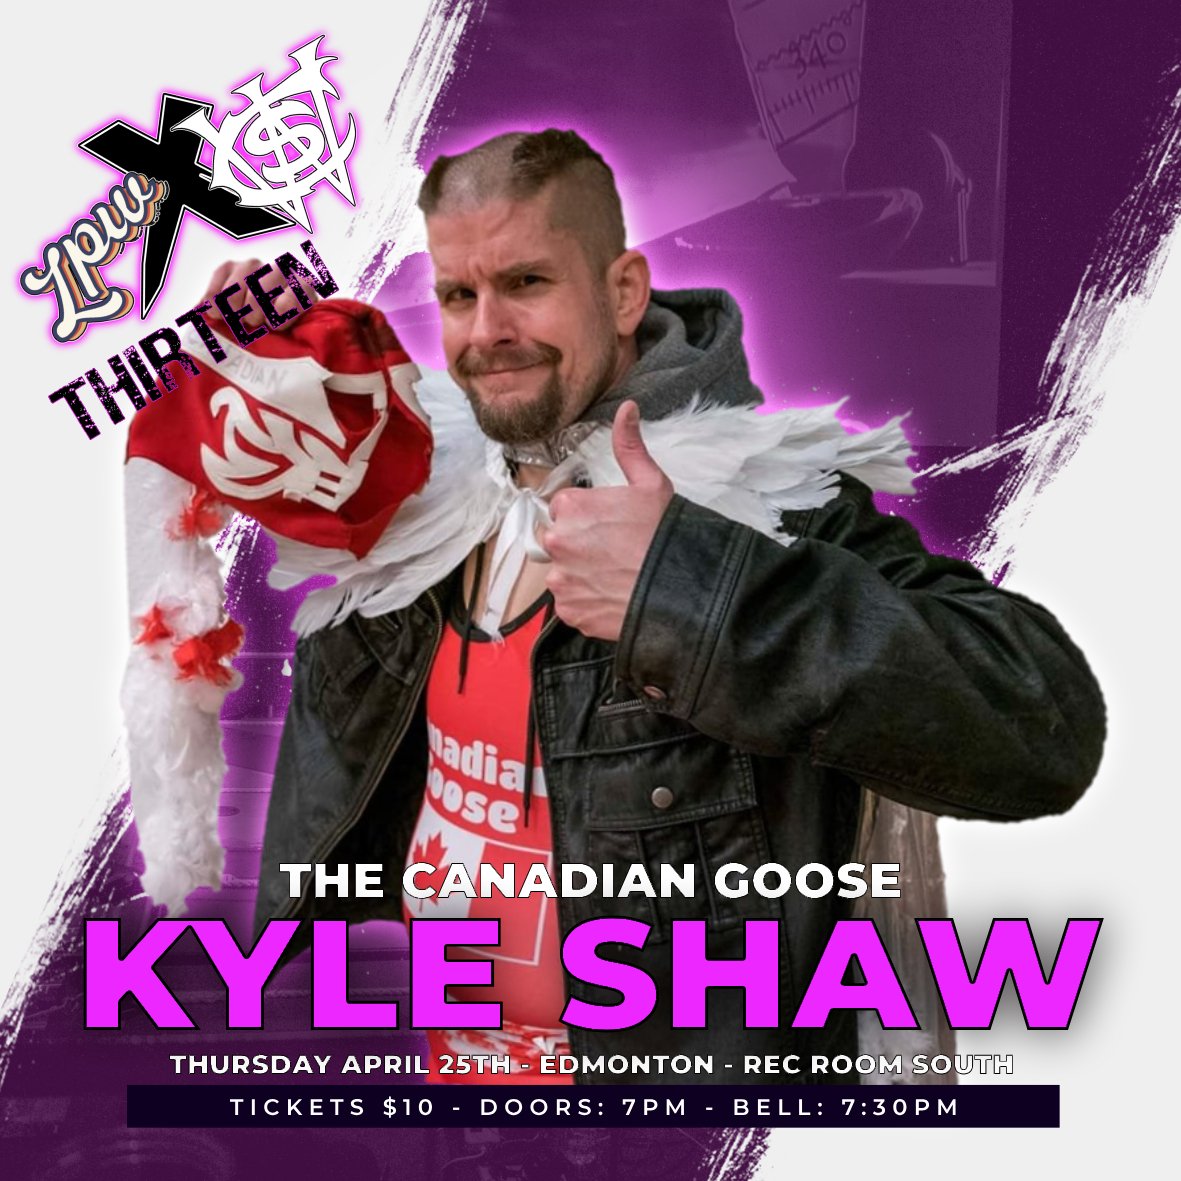 🚨LIVE WRESTLING! EDMONTON!🚨 LPWxCWS #13 - A PREQUEL TO LPW25 THURSDAY! APRIL 25TH! AT THE REC ROOM SOUTH! COME HONK ALONG WITH... THE CANADIAN GOOSE KYLE SHAW TICKETS AVAILABLE IN ADVANCE AT THE LINK OR AT THE DOOR FOR ONLY $10(+fees)! 🎟️ tixr.com/groups/lovewre… 🎟️ BE